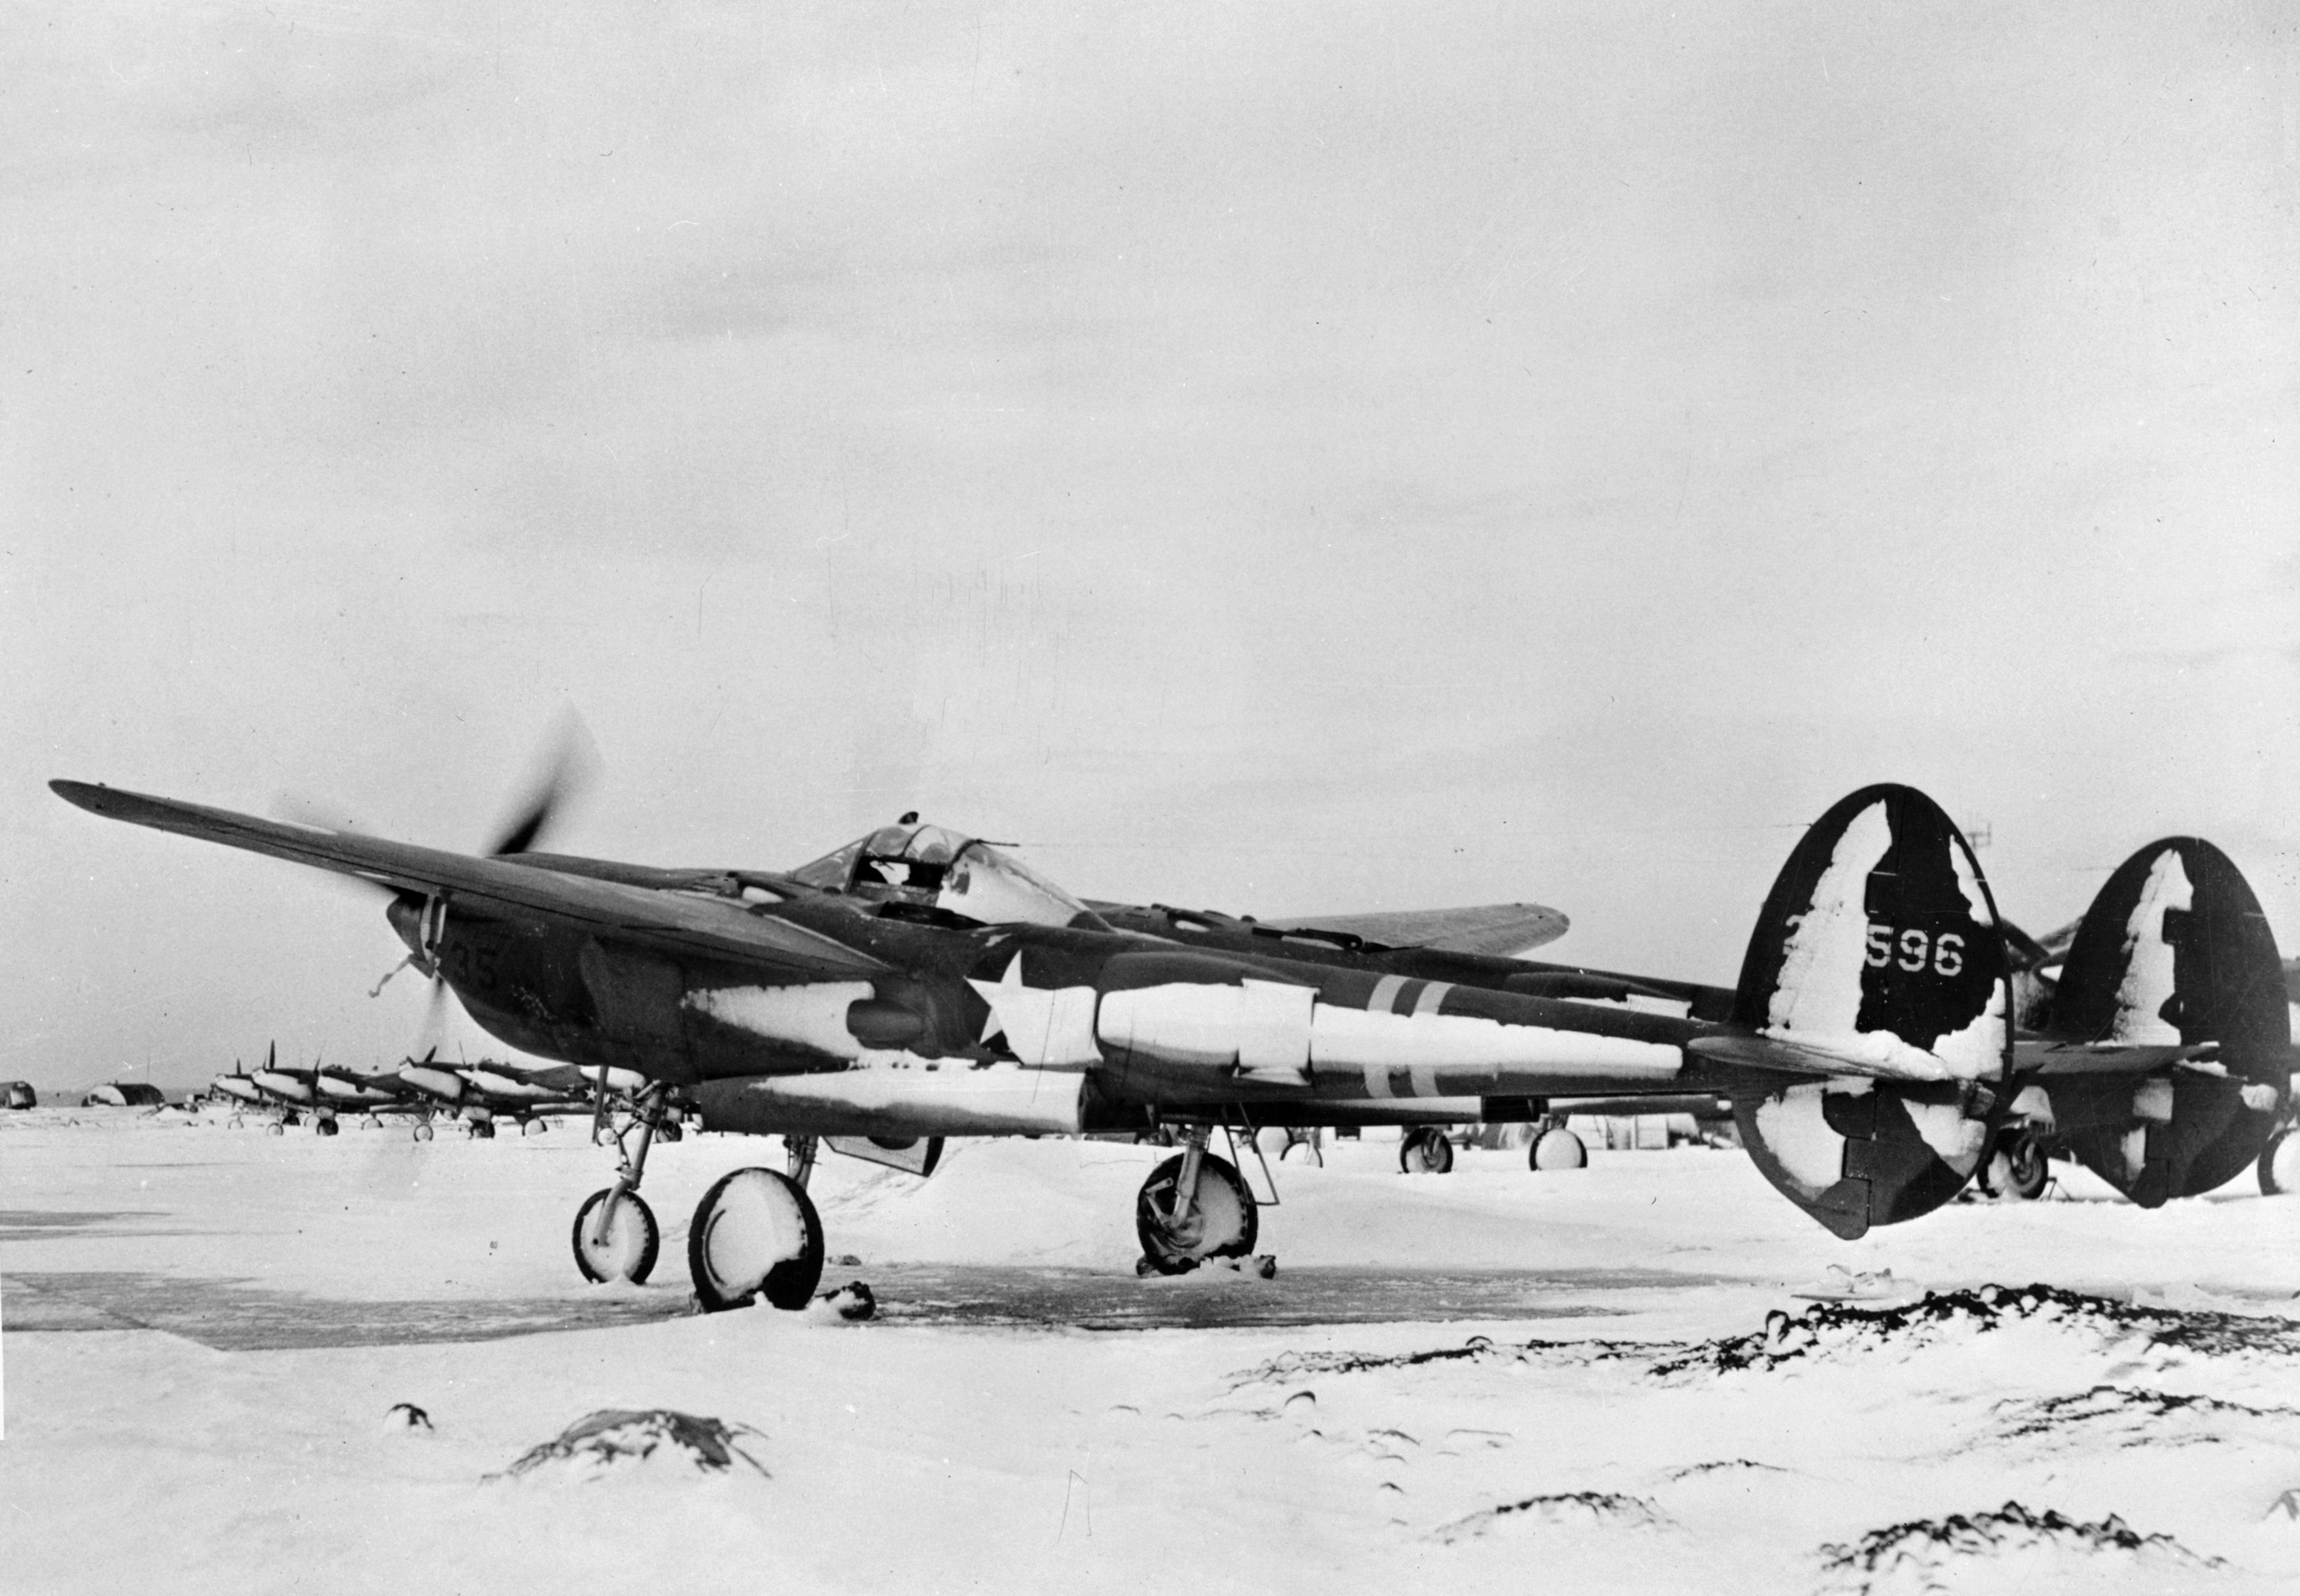 P-38F Lightning aircraft of 50th Fighter Squadron, USAAF 14th Fighter Group at Camp Tripoli airfield, Iceland, Nov 1942